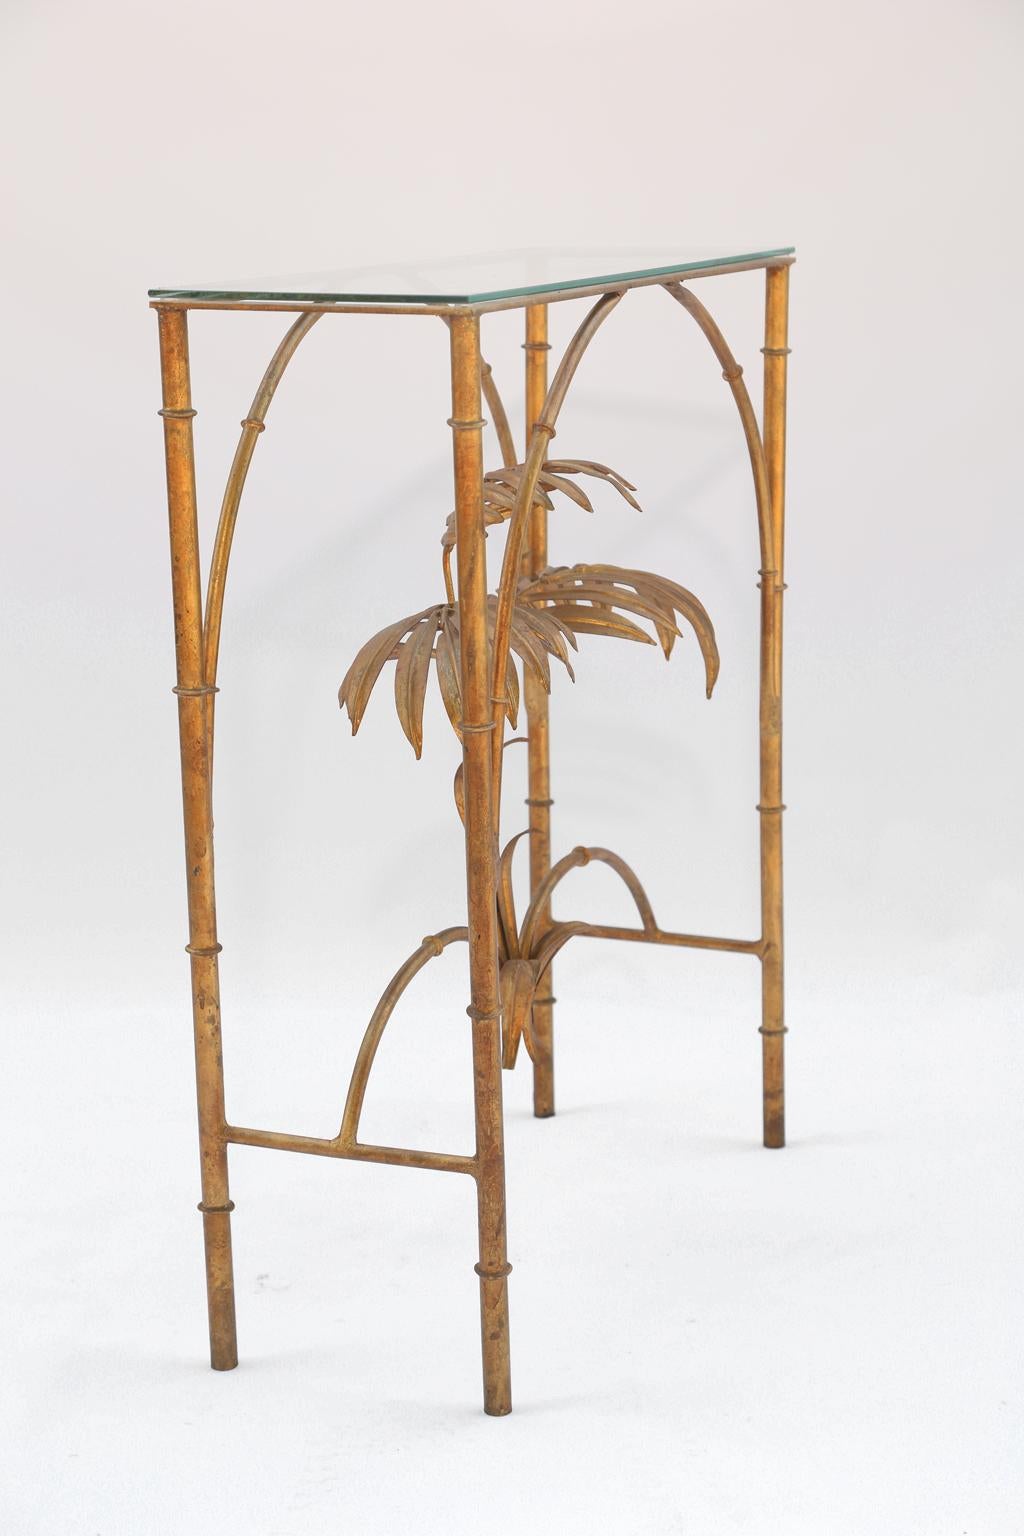 Console, of iron, in the Hollywood Regency style, having a gilded finish, its rectangular glass top on faux bamboo table base of four legs, joined by double arches, framing a palm tree.

Stock ID:  D1824